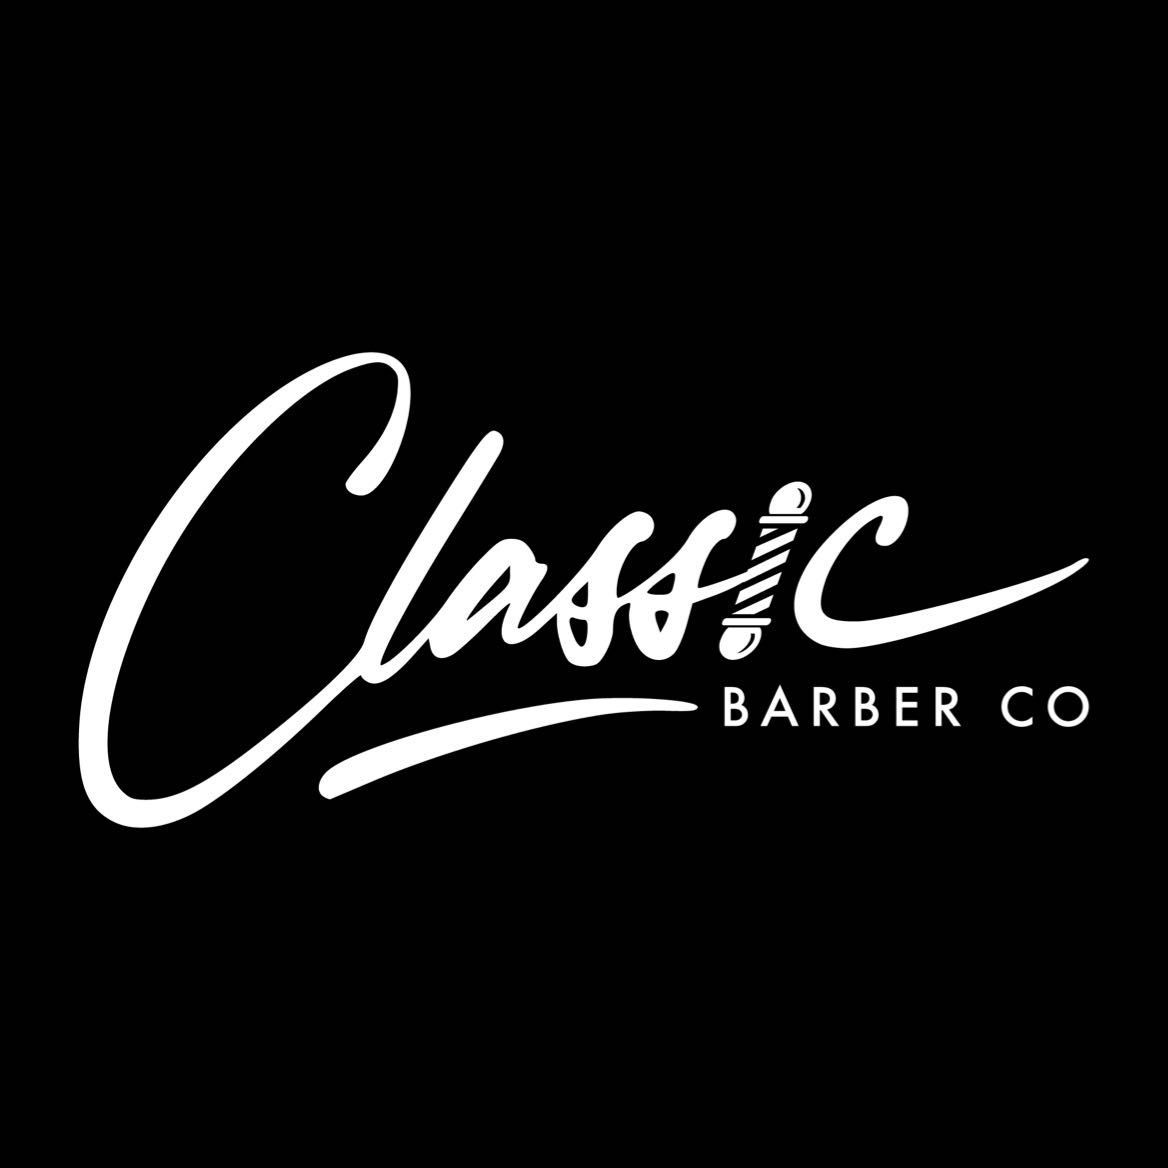 Classic barber co- Jay, 7145 pacific ave, Stockton, 95207